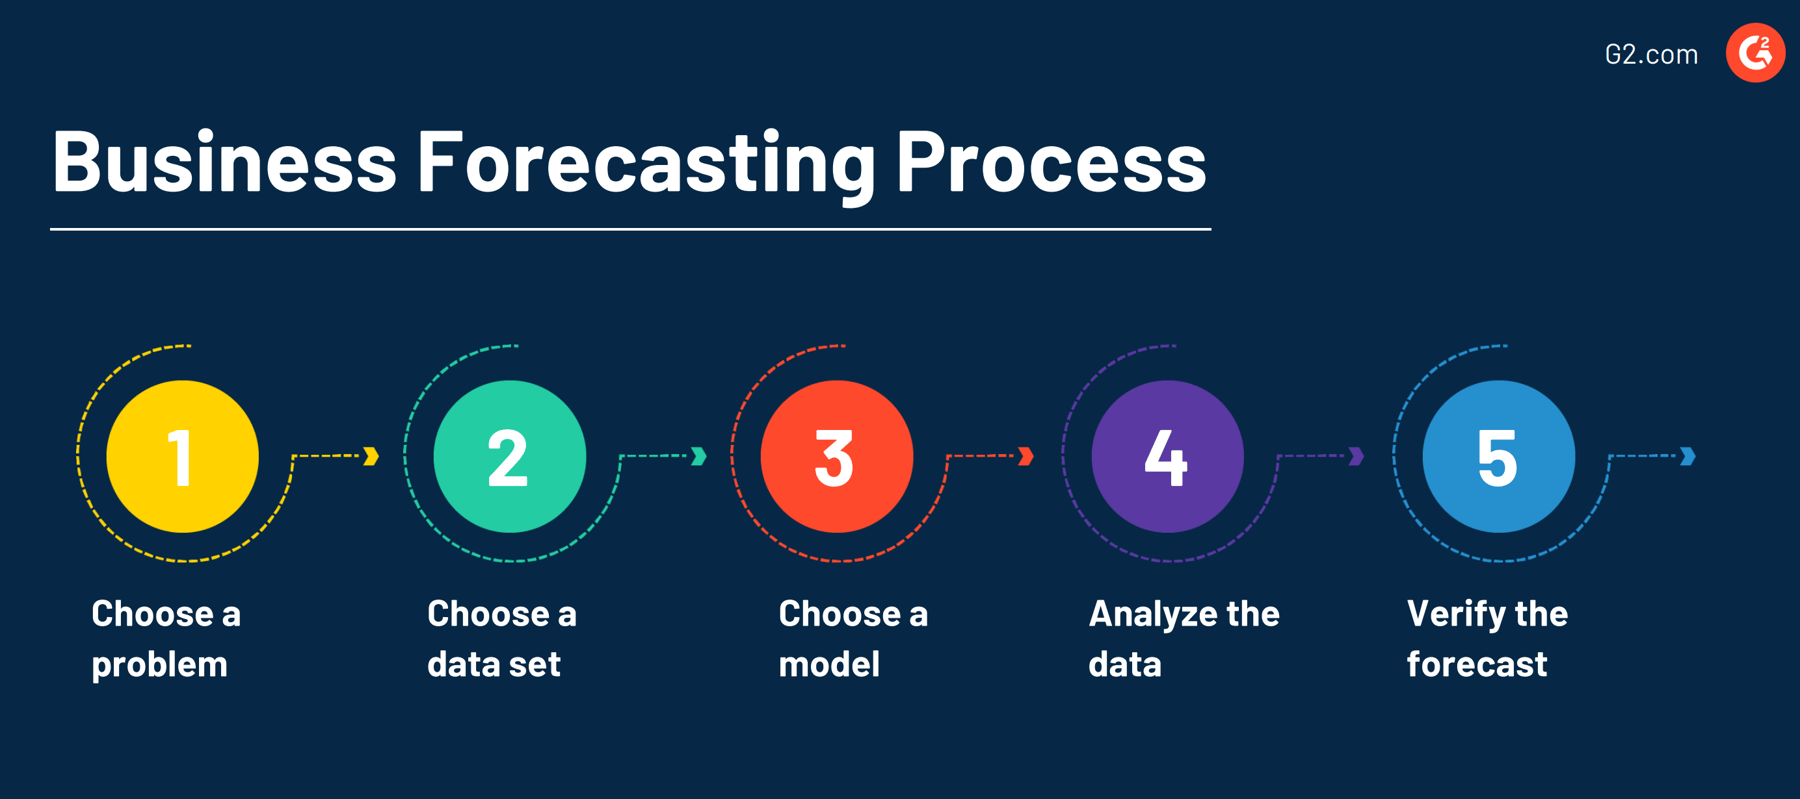 Expect the Unexpected Business Forecasting Makes It Easy